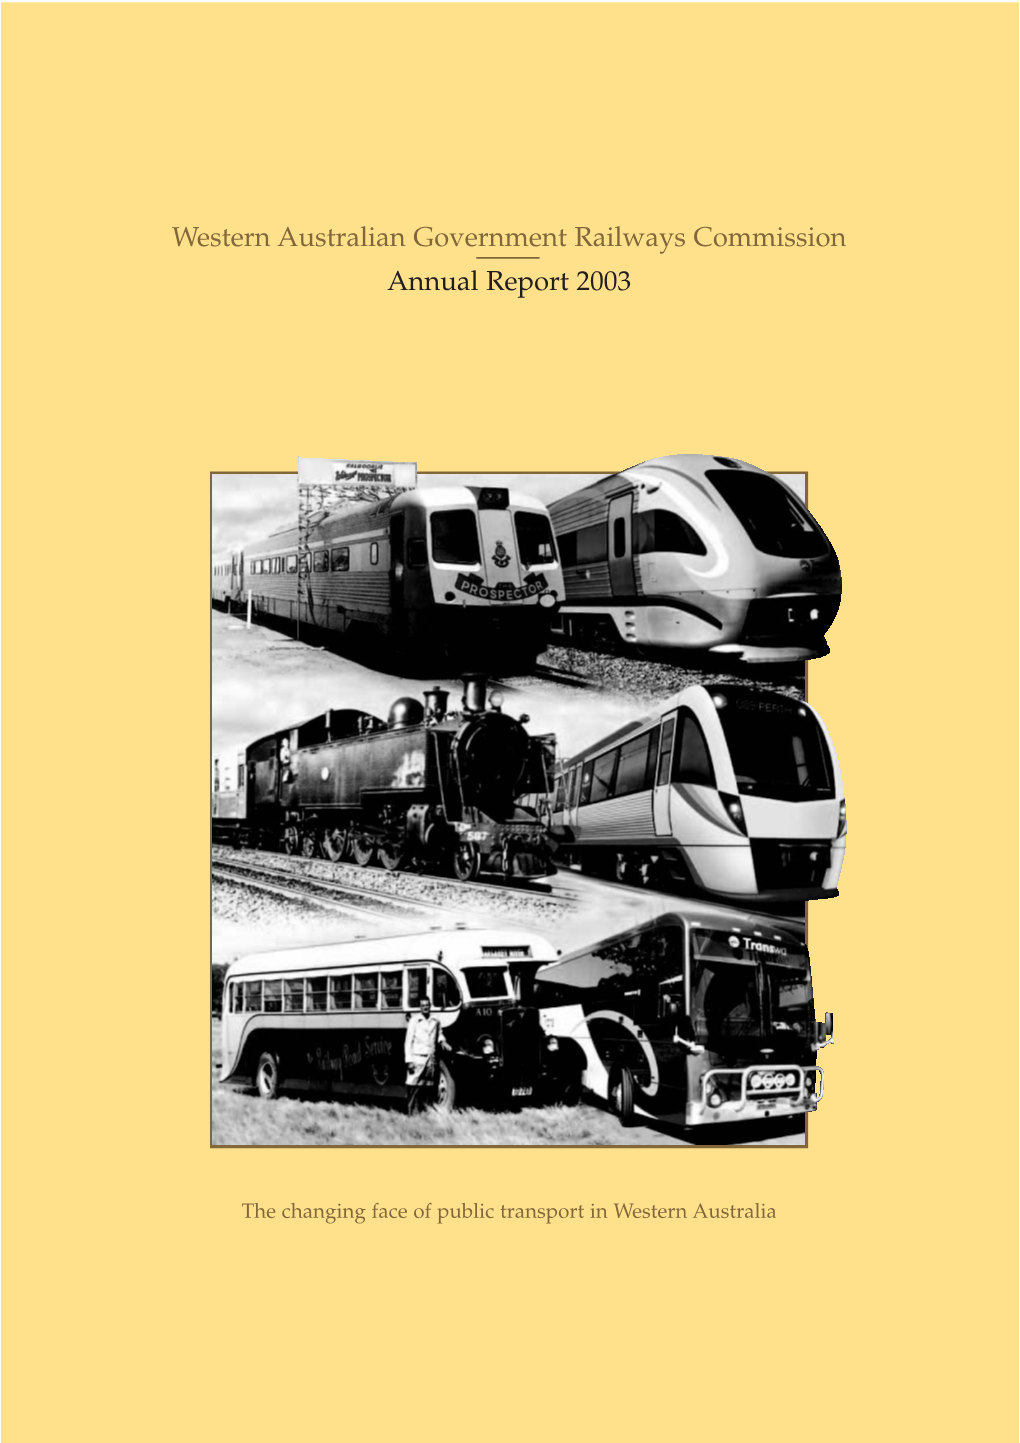 Western Australian Government Railways Commission Annual Report 2003